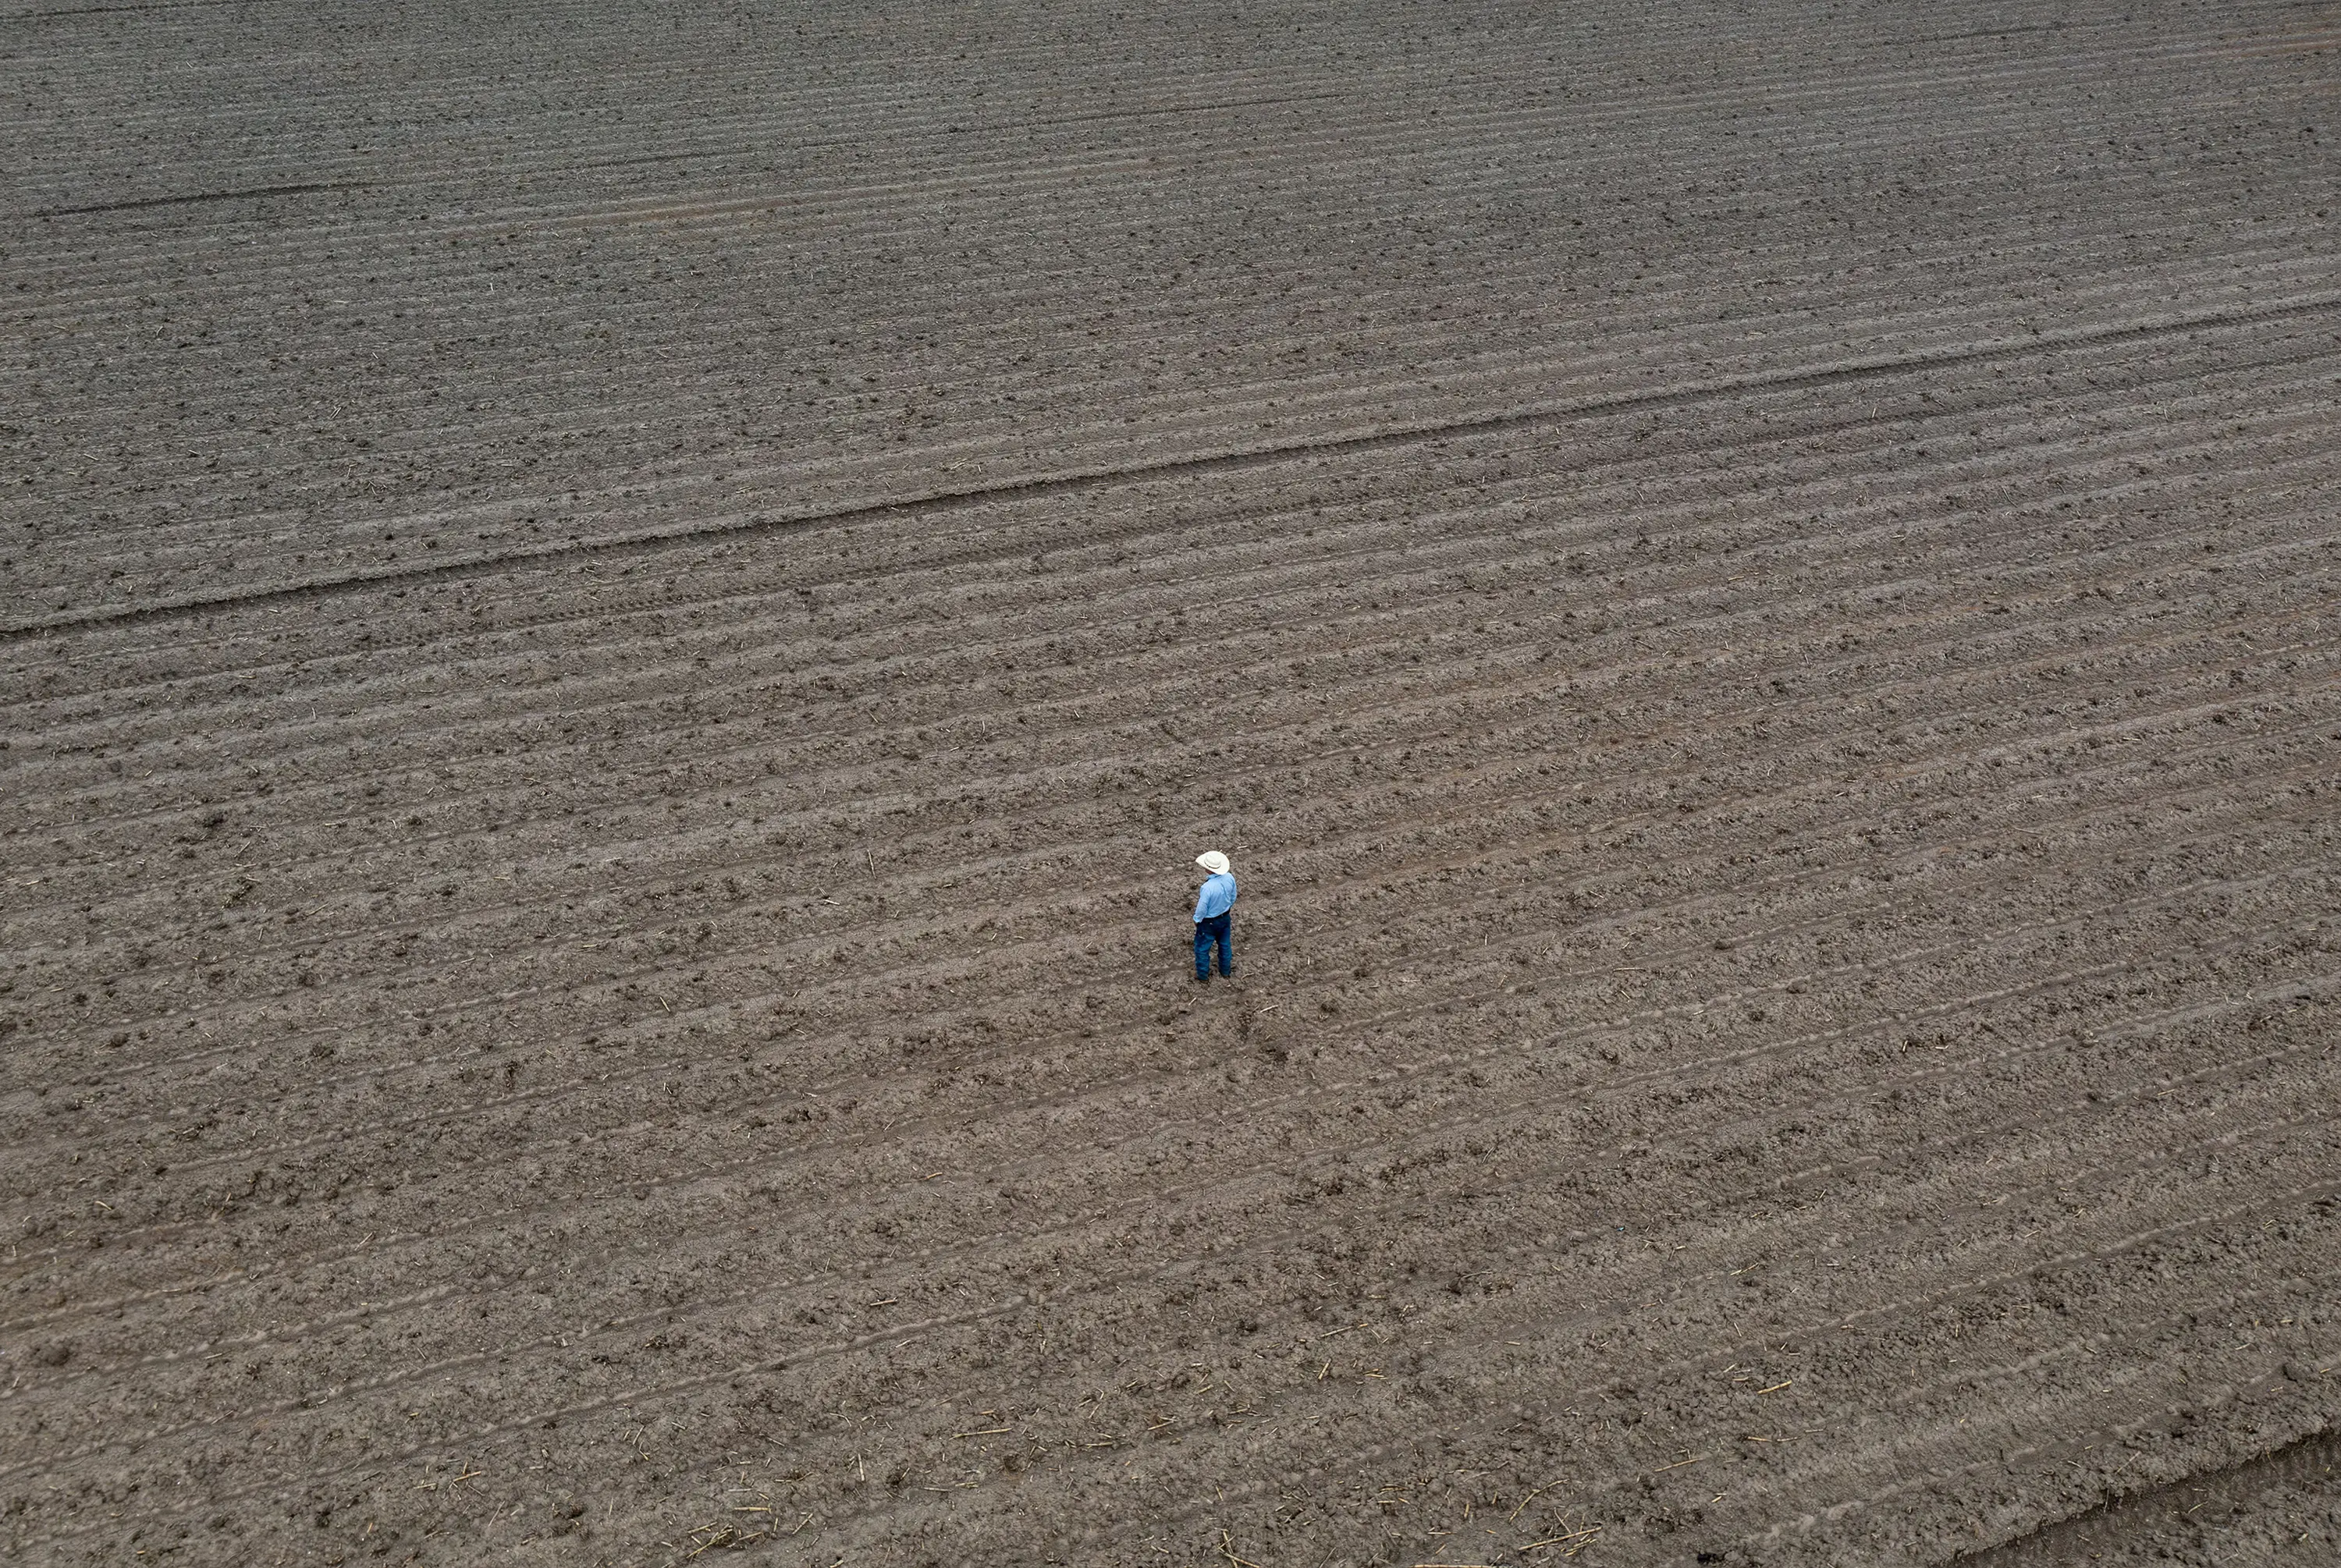 Mike England, who owns England Farms and Cattle Company located 29 miles east of McAllen, walks across one of the fields on his farm near Mercedes, Texas on 18 April 2024. England had to destroy 500 acres worth of sugar cane he’d grown because of the ongoing drought in the Rio Grande Valley. Credit: Photo: Ben Lowy / The Texas Tribune